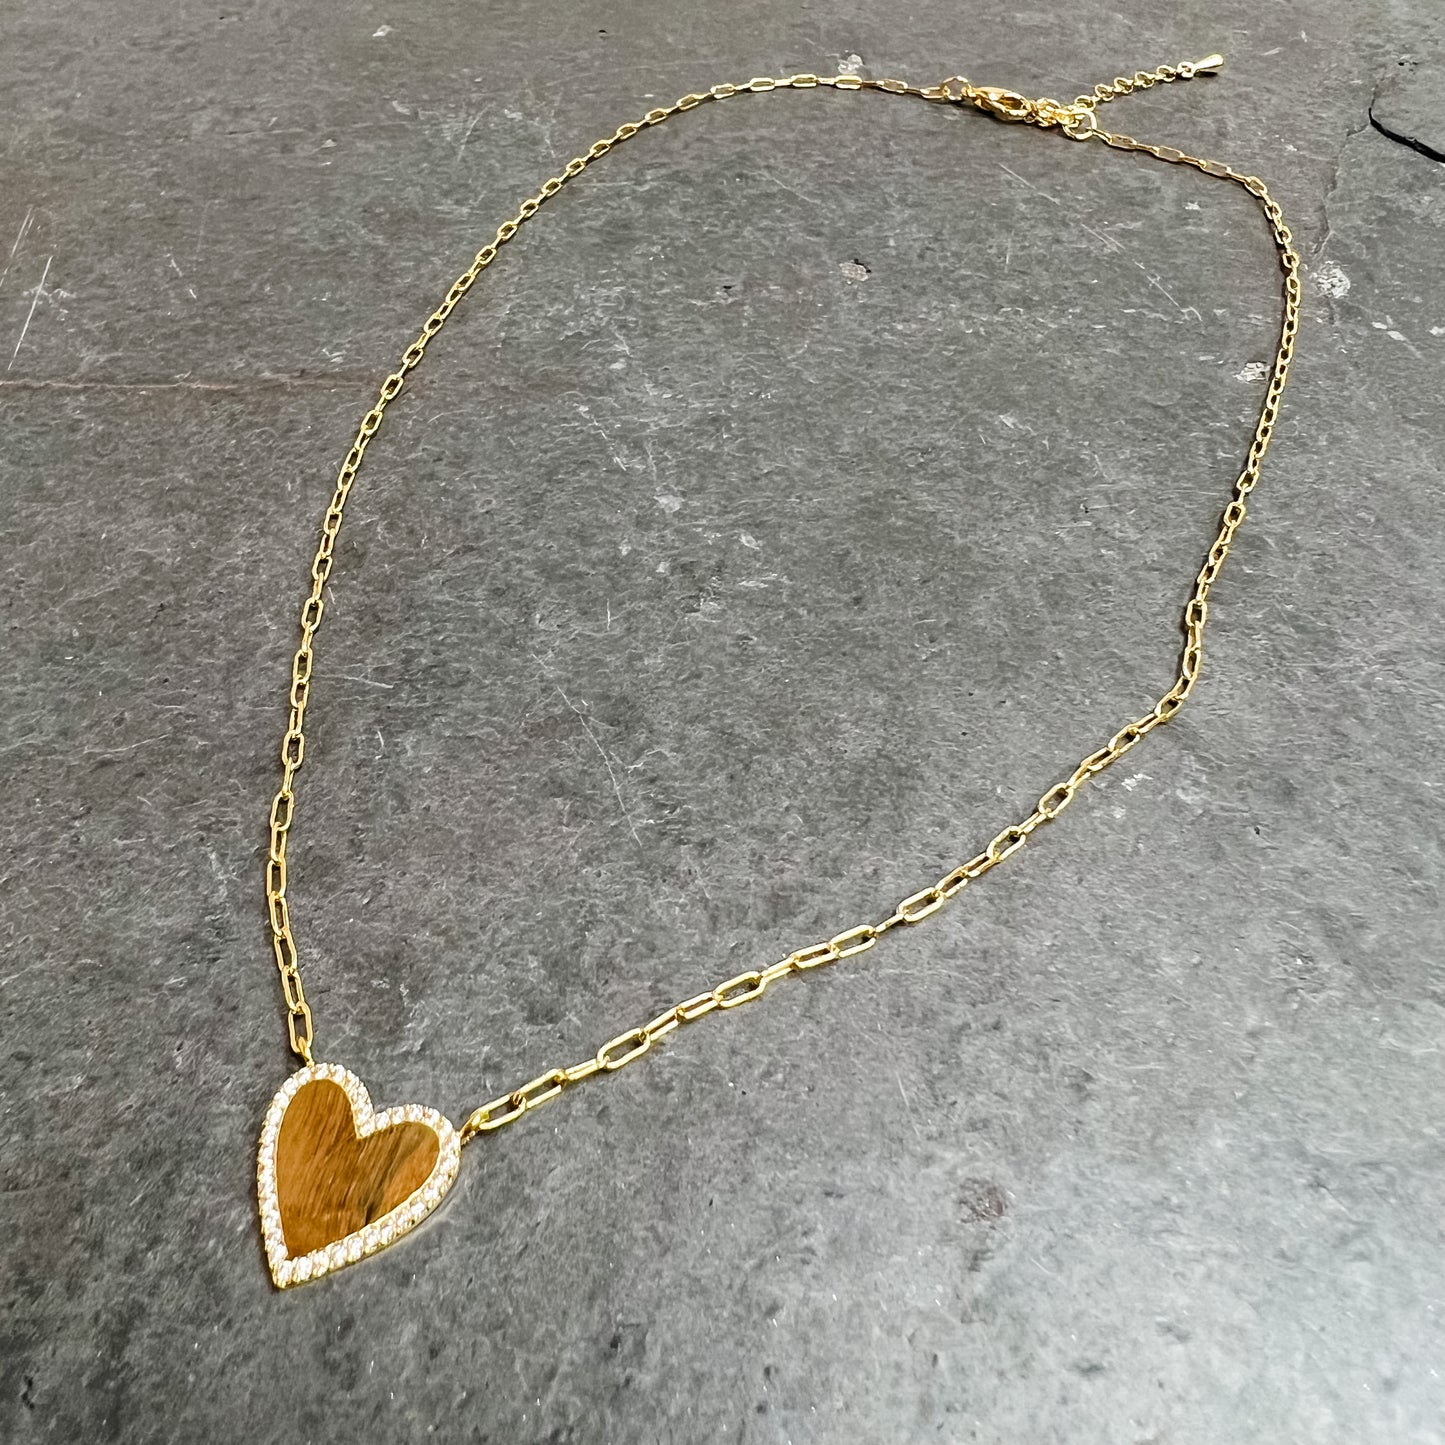 The All My Love Necklace